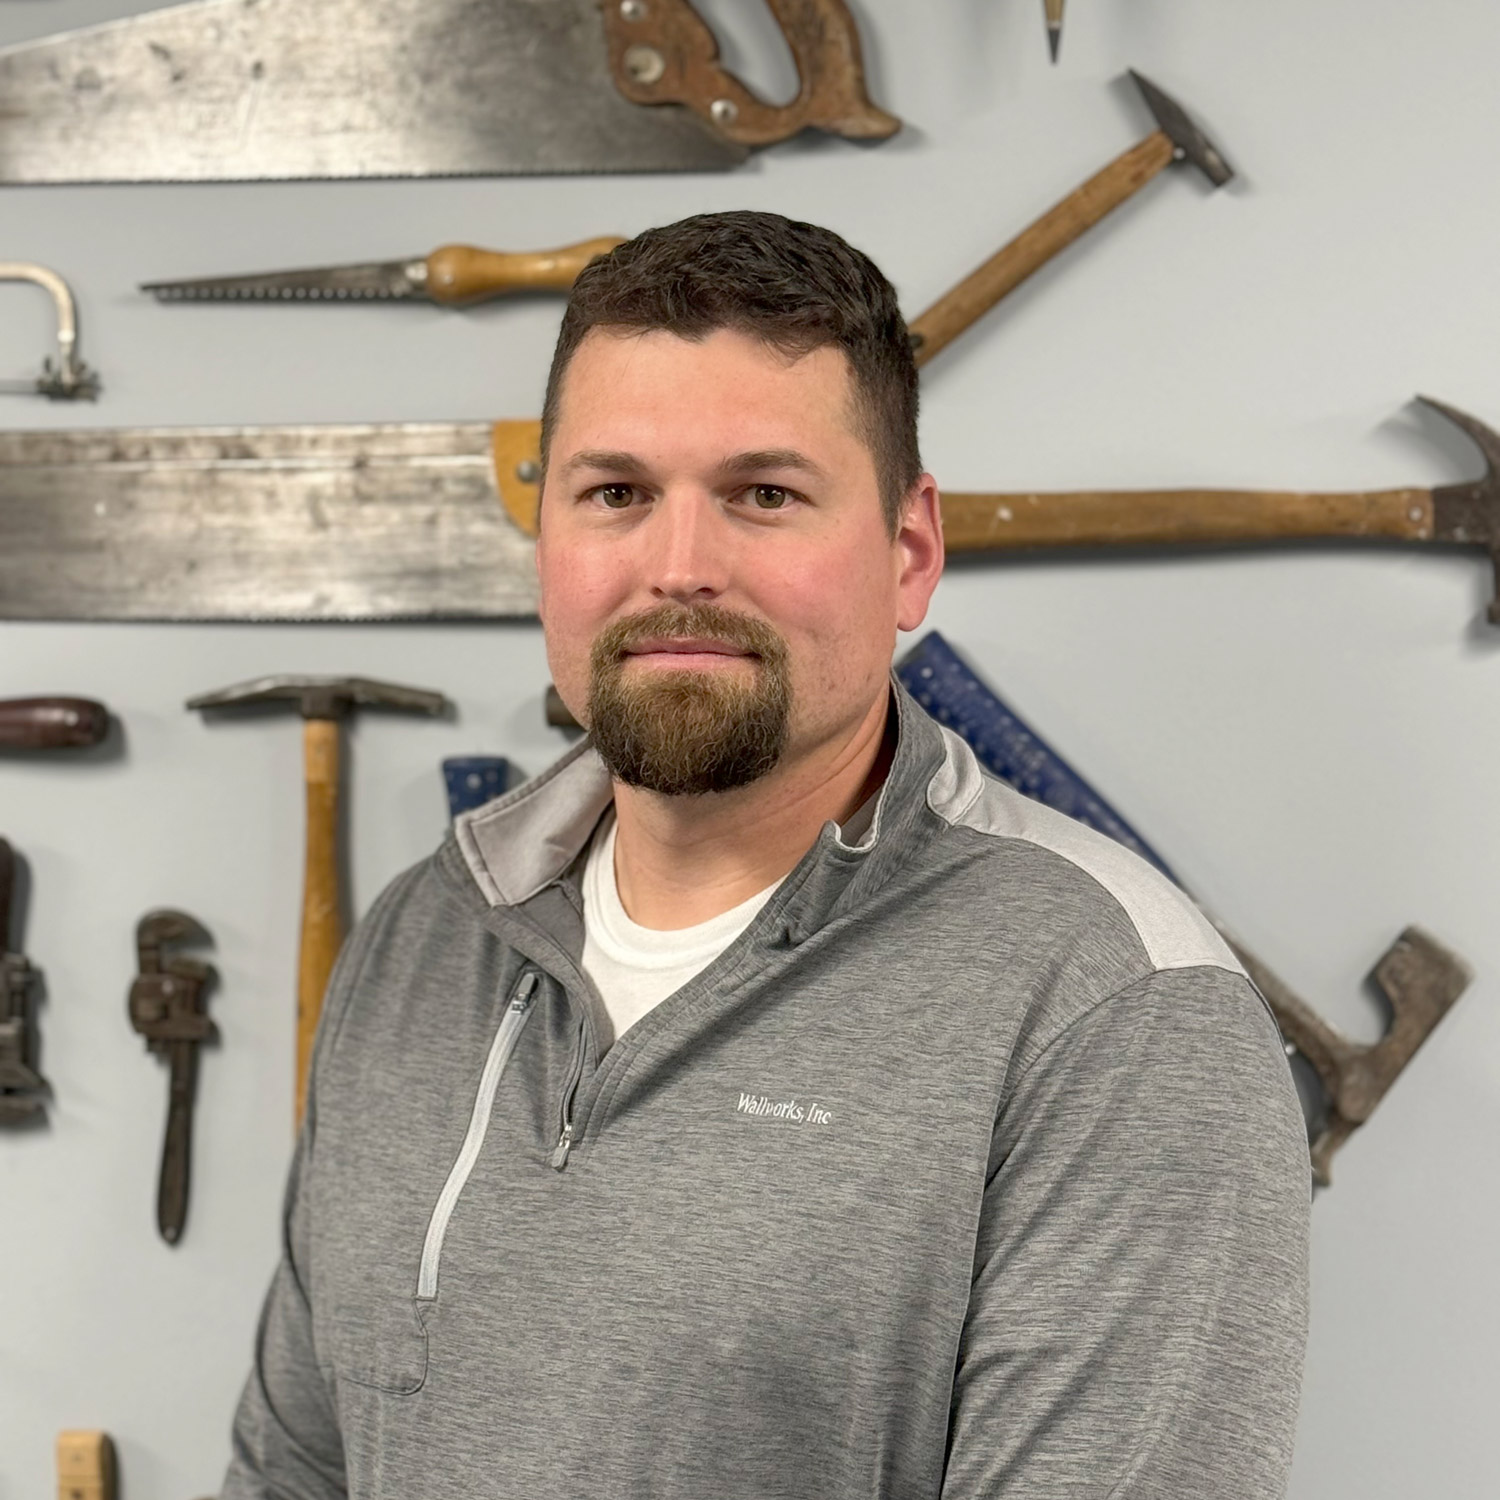 Wallworks is pleased to announce Jon Mitchell has been named Director of Operations